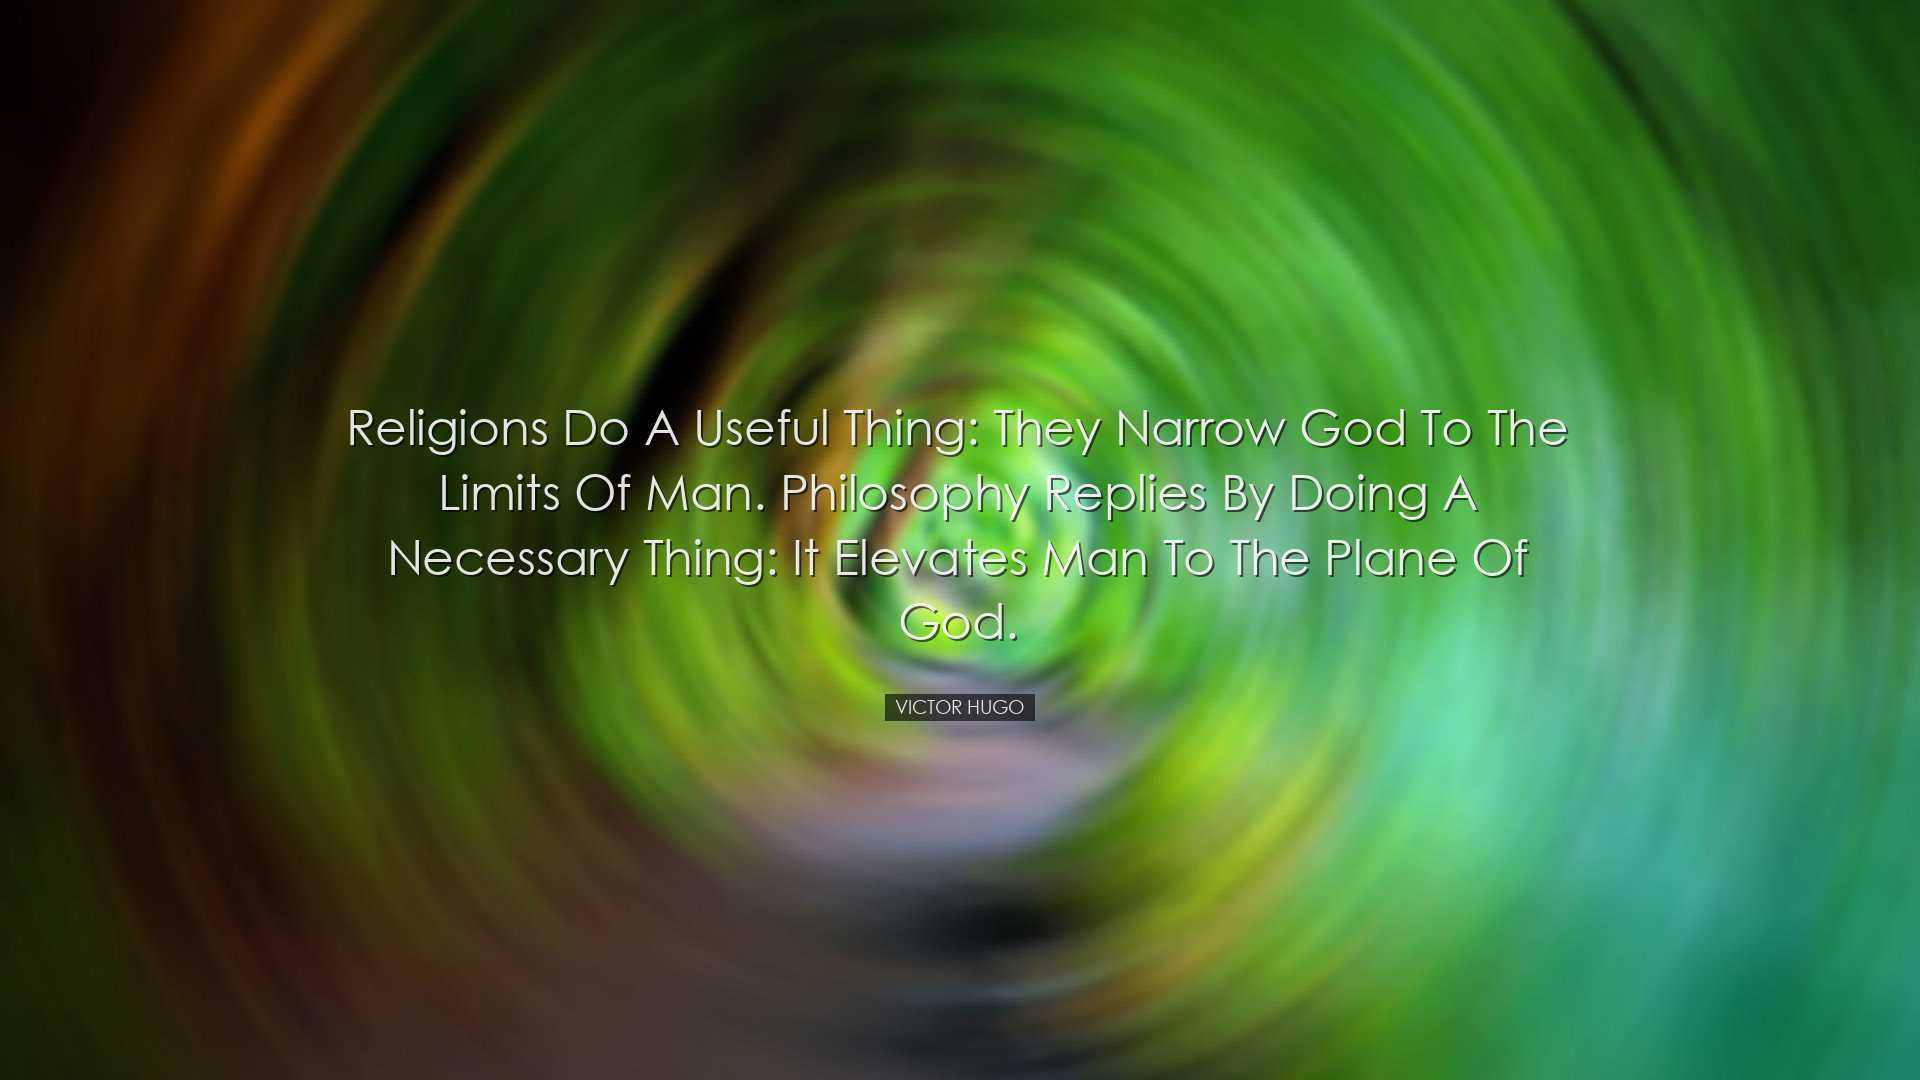 Religions do a useful thing: they narrow God to the limits of man.